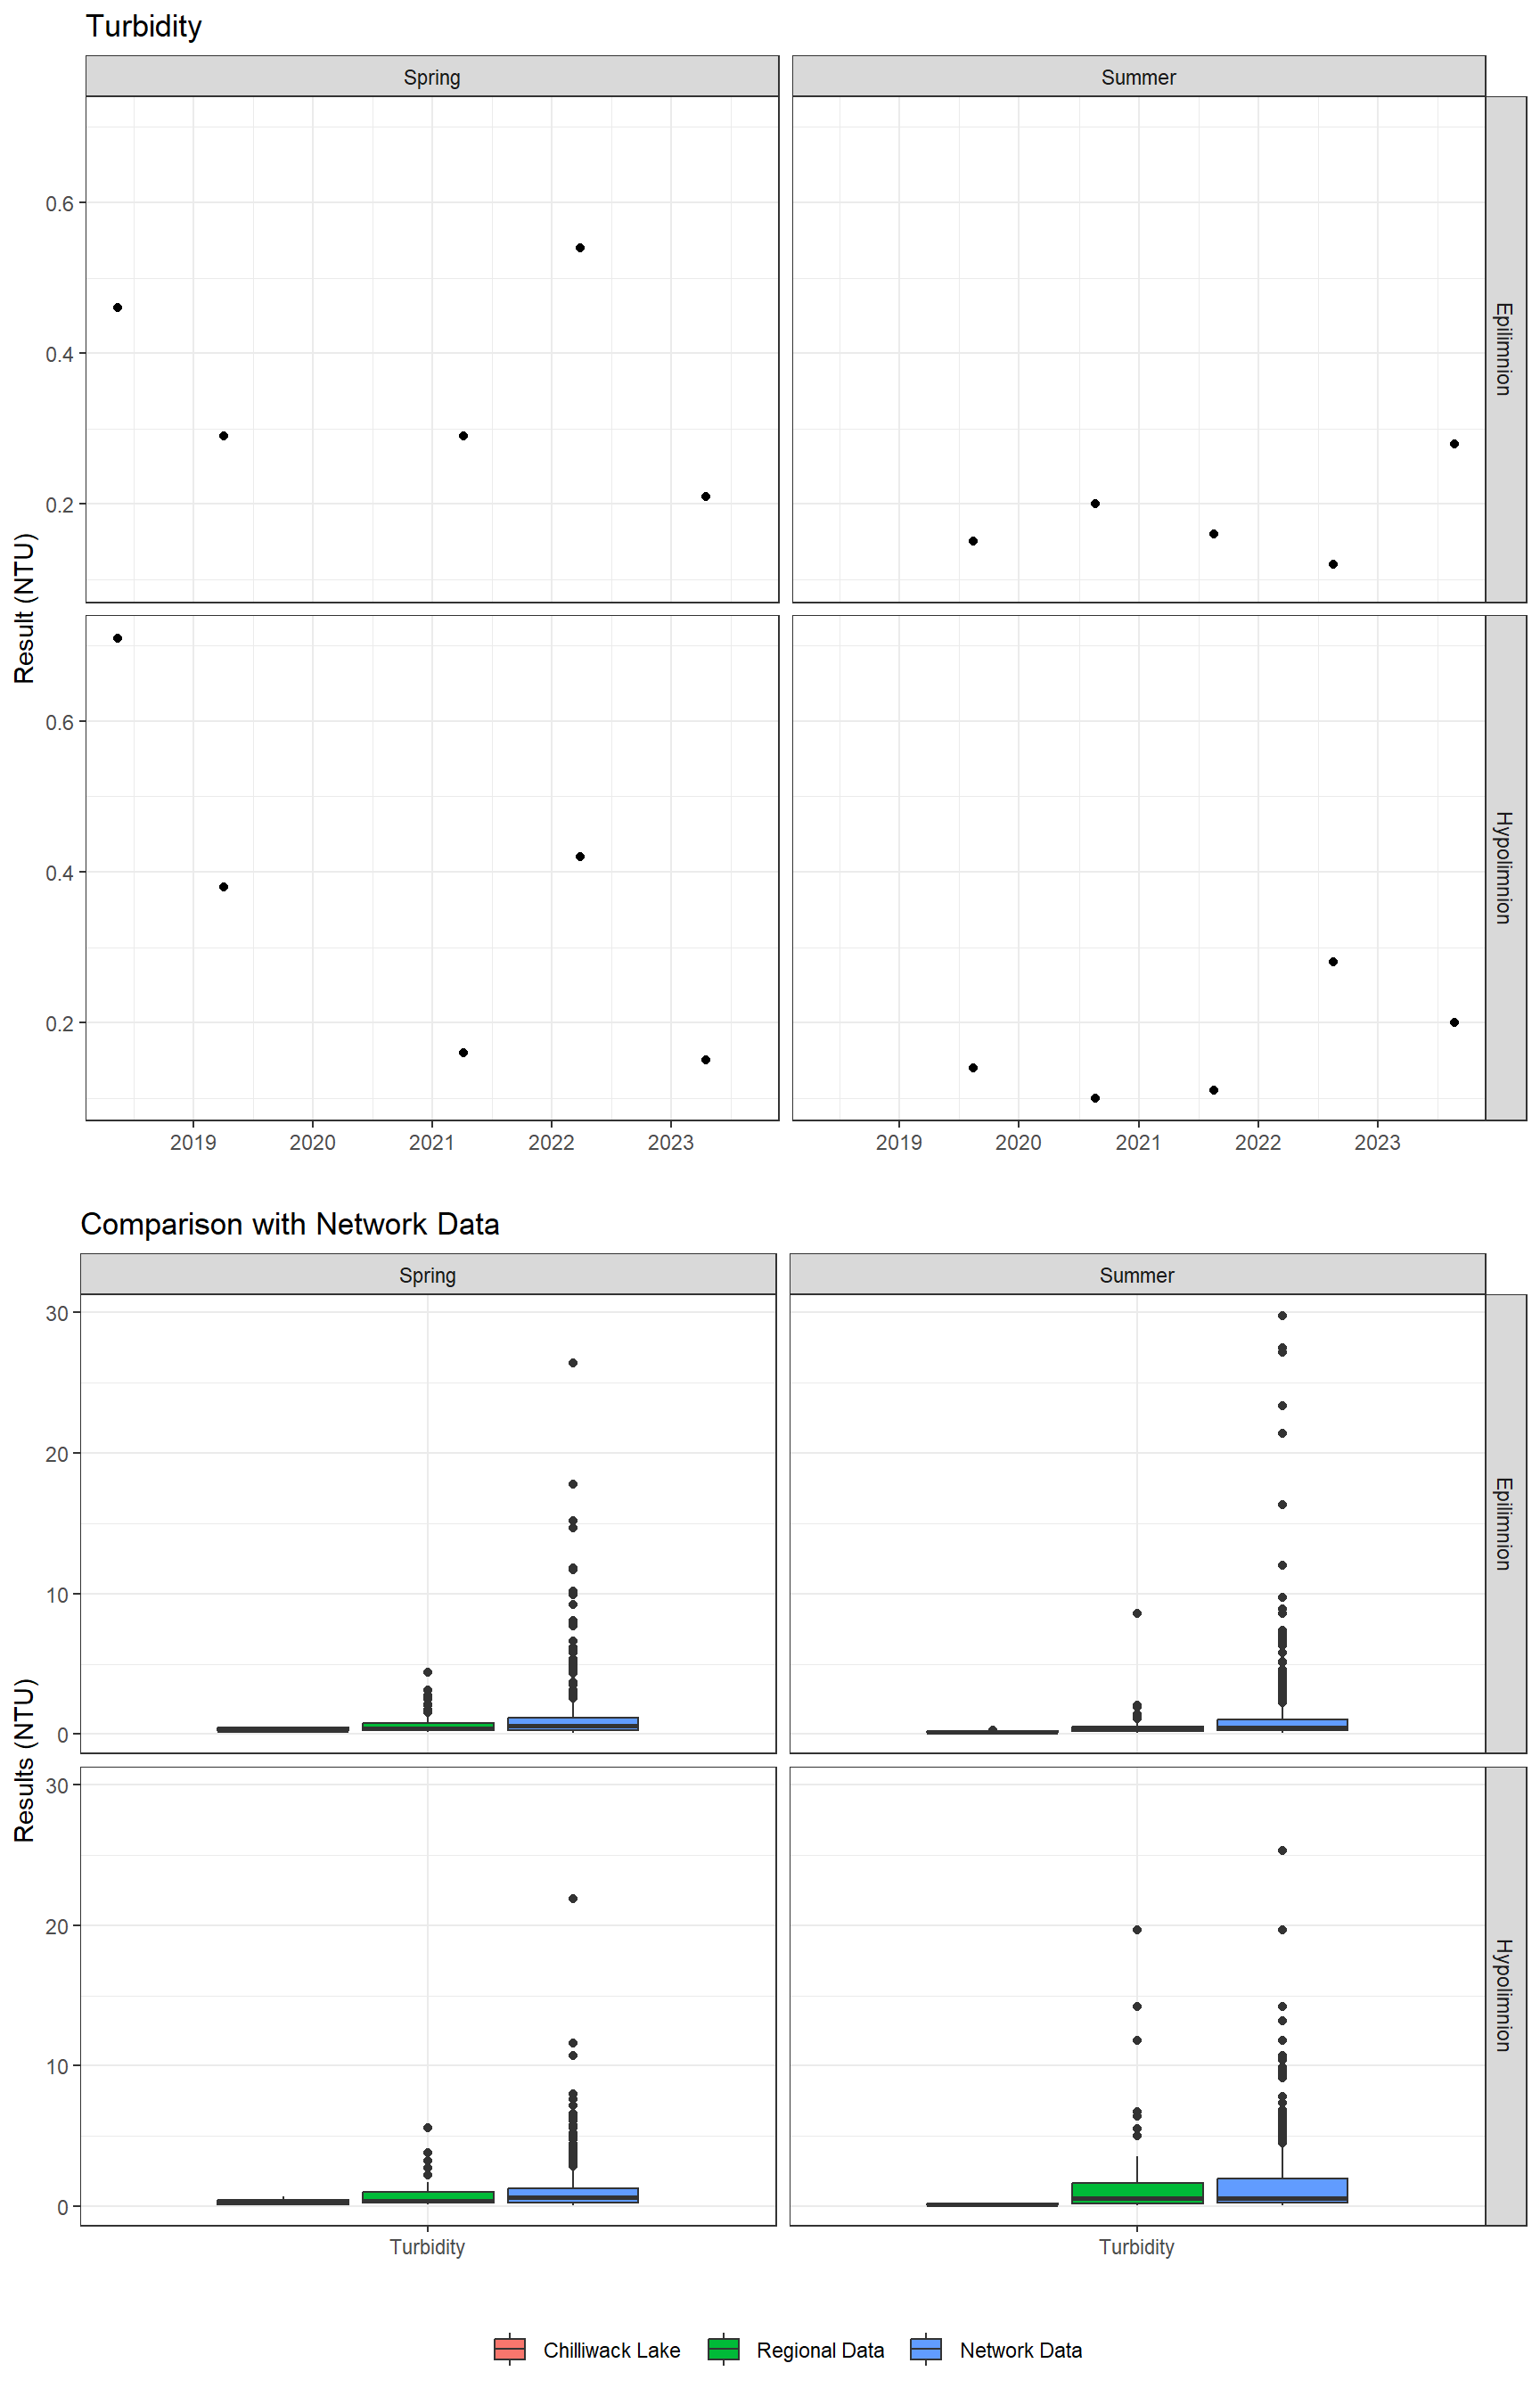 A plot showing results for Turbidity